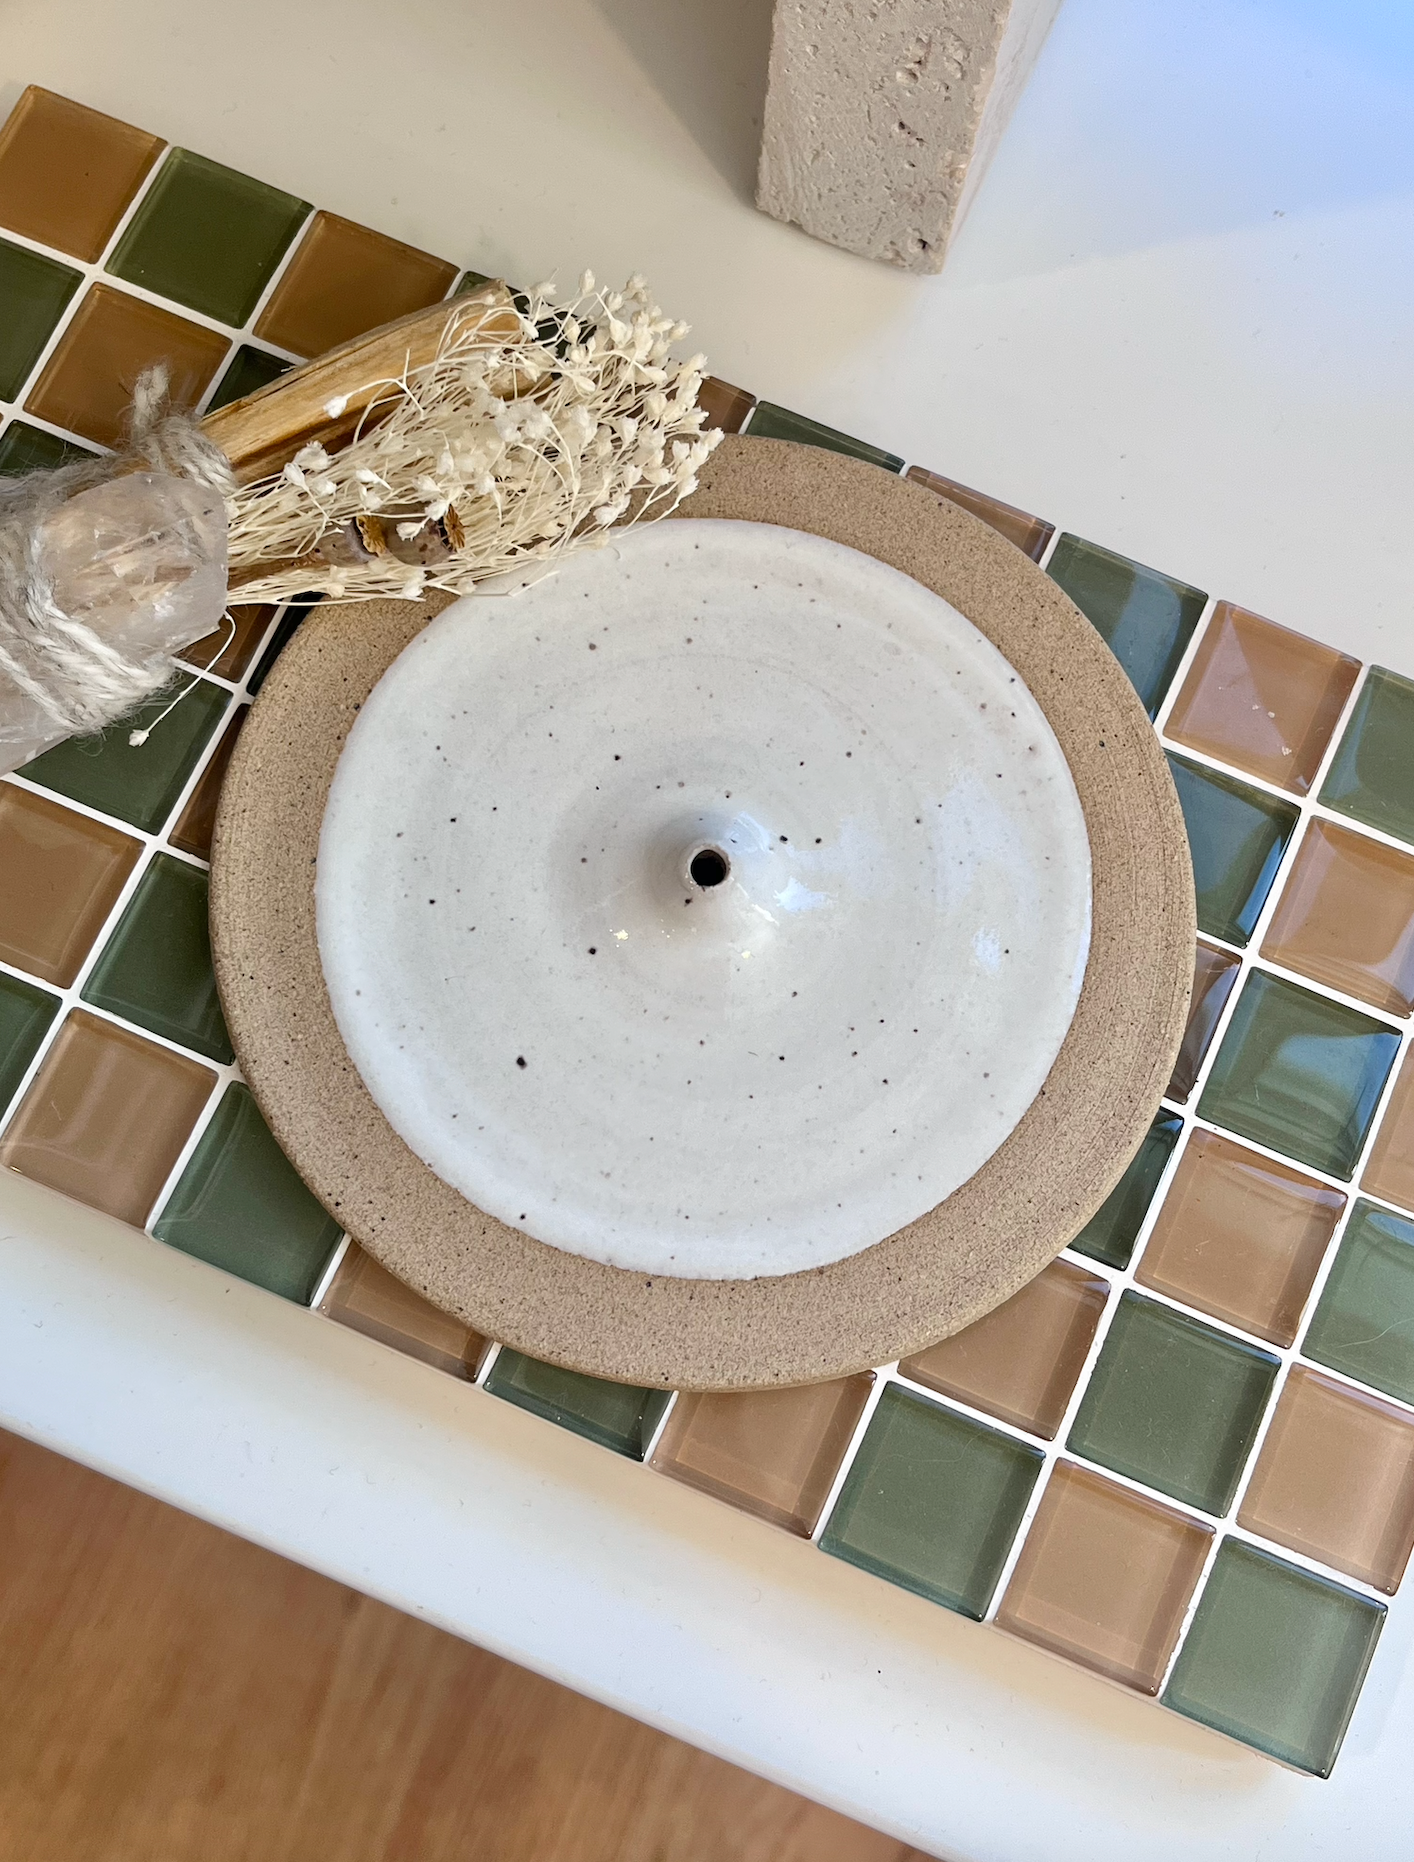 Handmade ceramic incense holder with a white speckled glaze. Each item is made individually in Olympia, Washington and there will be slight variation in each one.